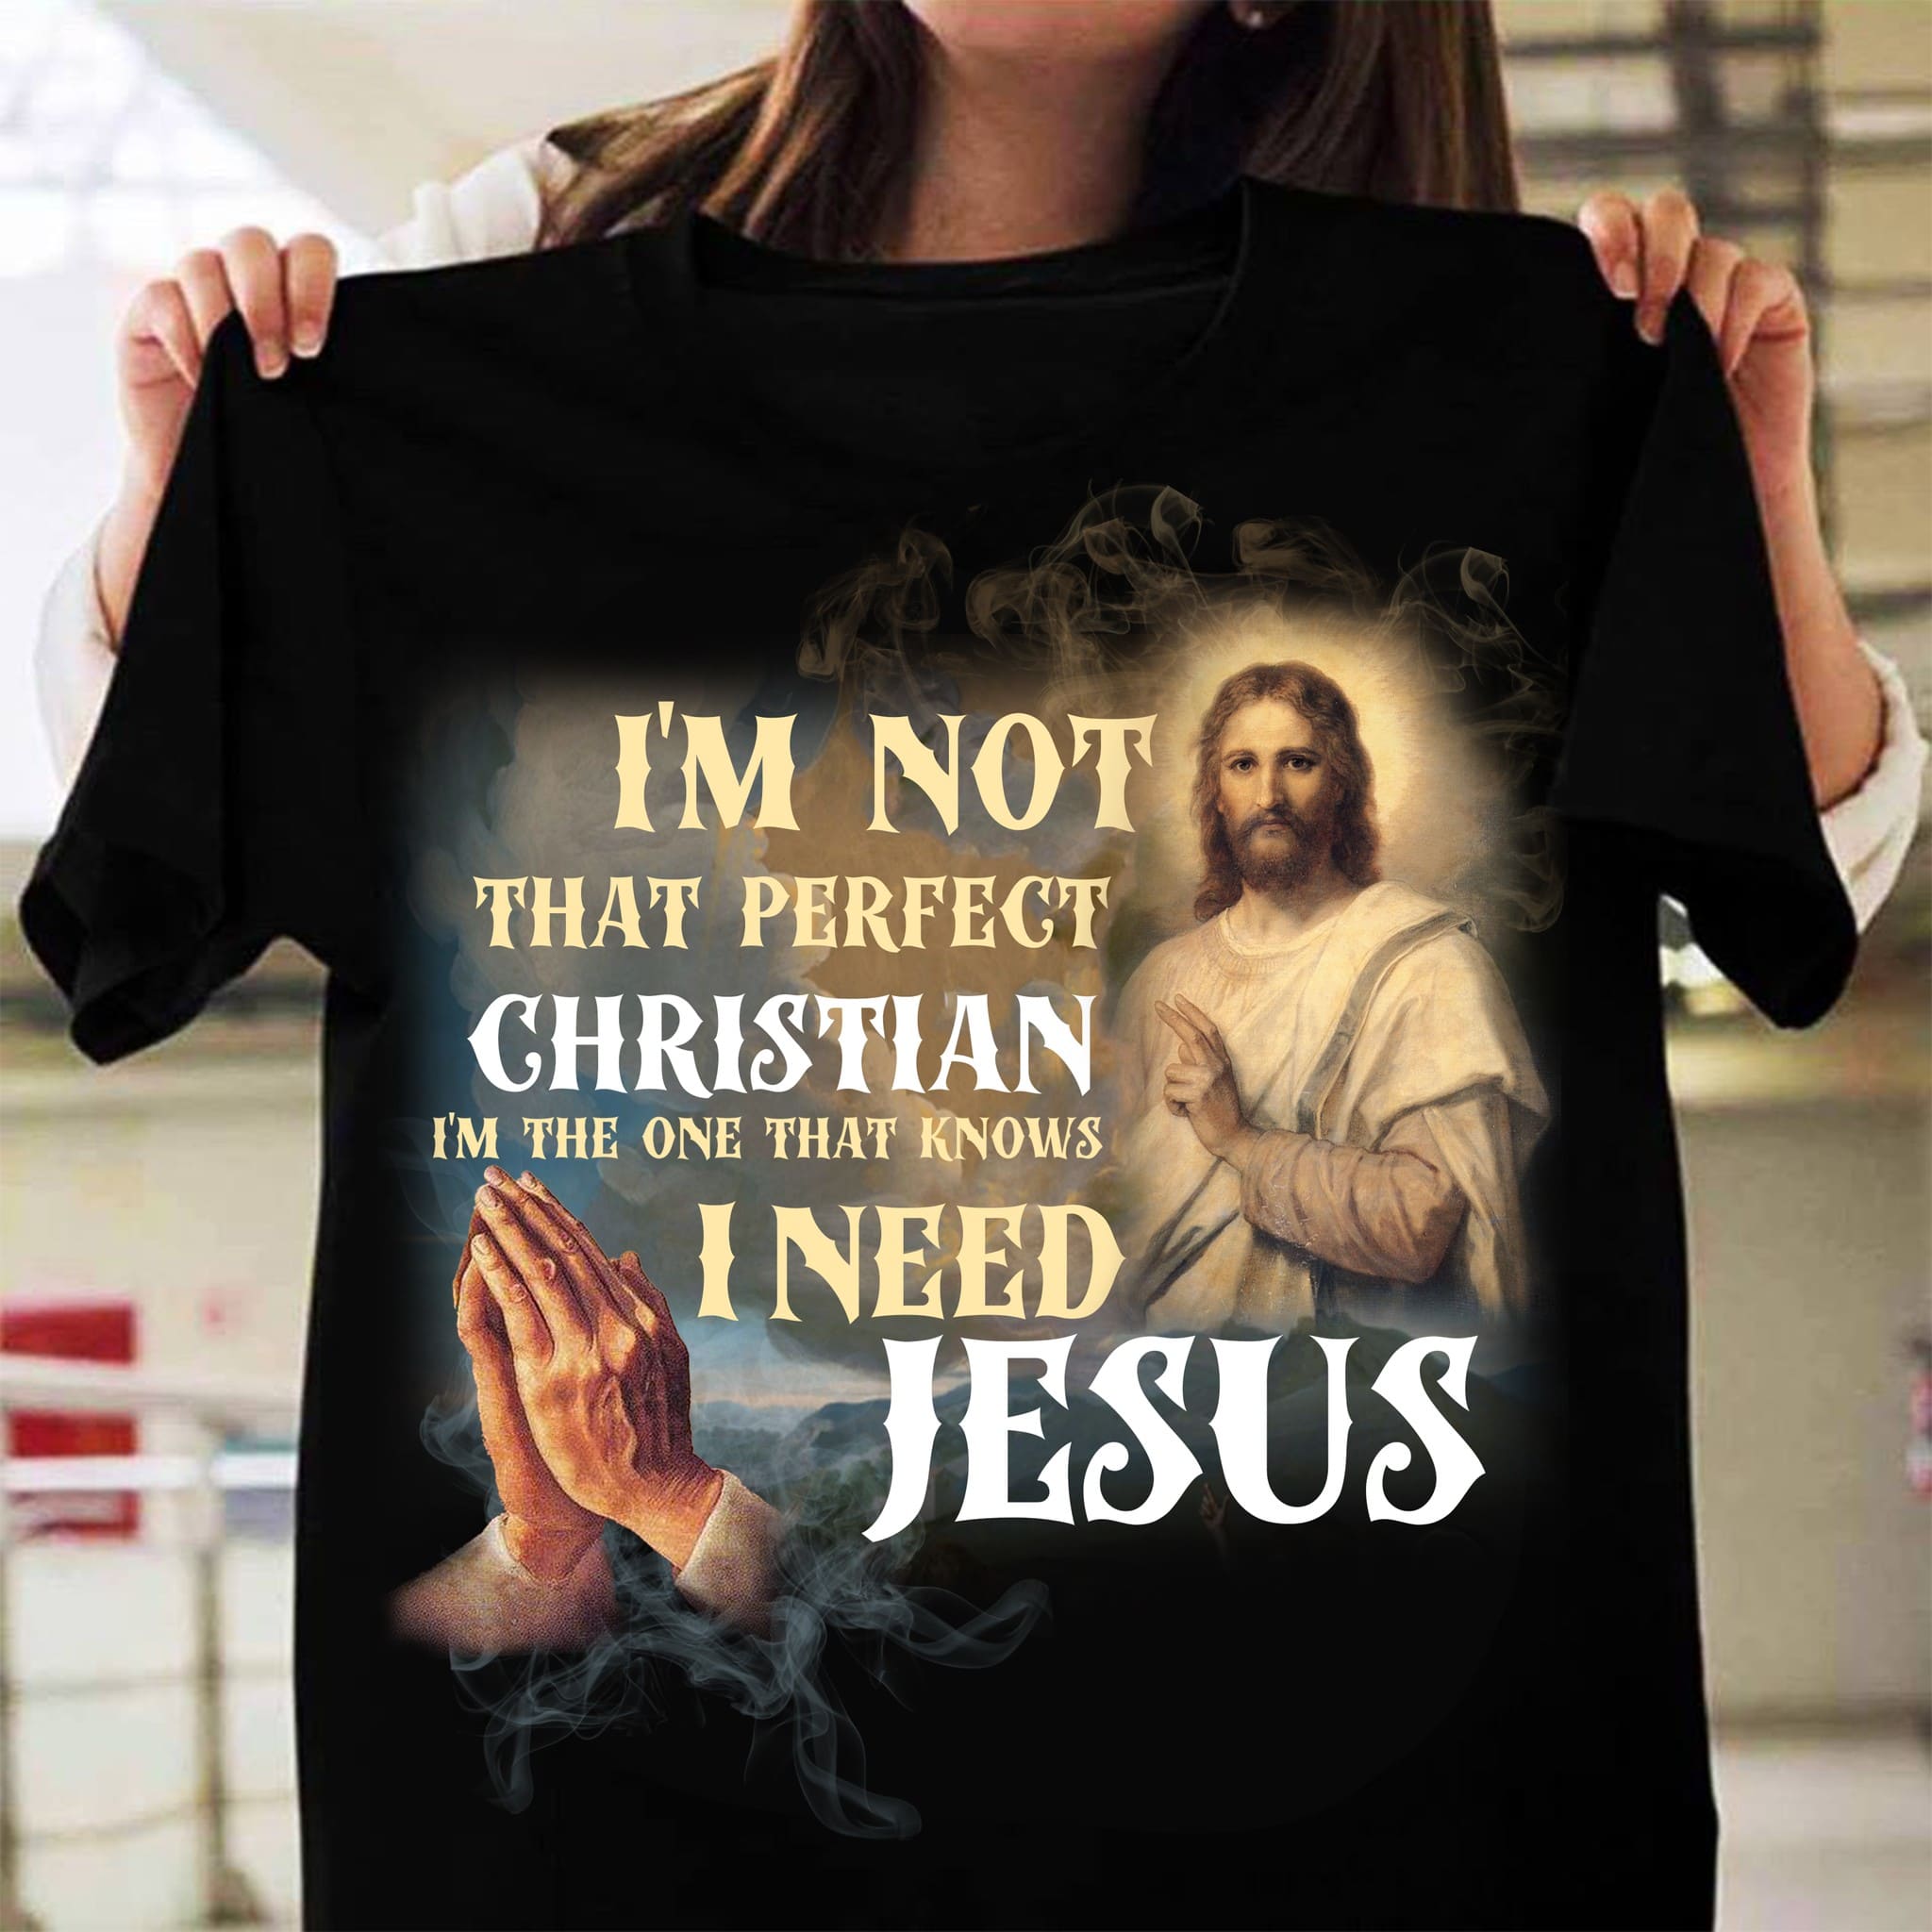 I'm not that perfect Christian I'm the one that knows I need Jesus - Believe in Jesus, gift for Christmas